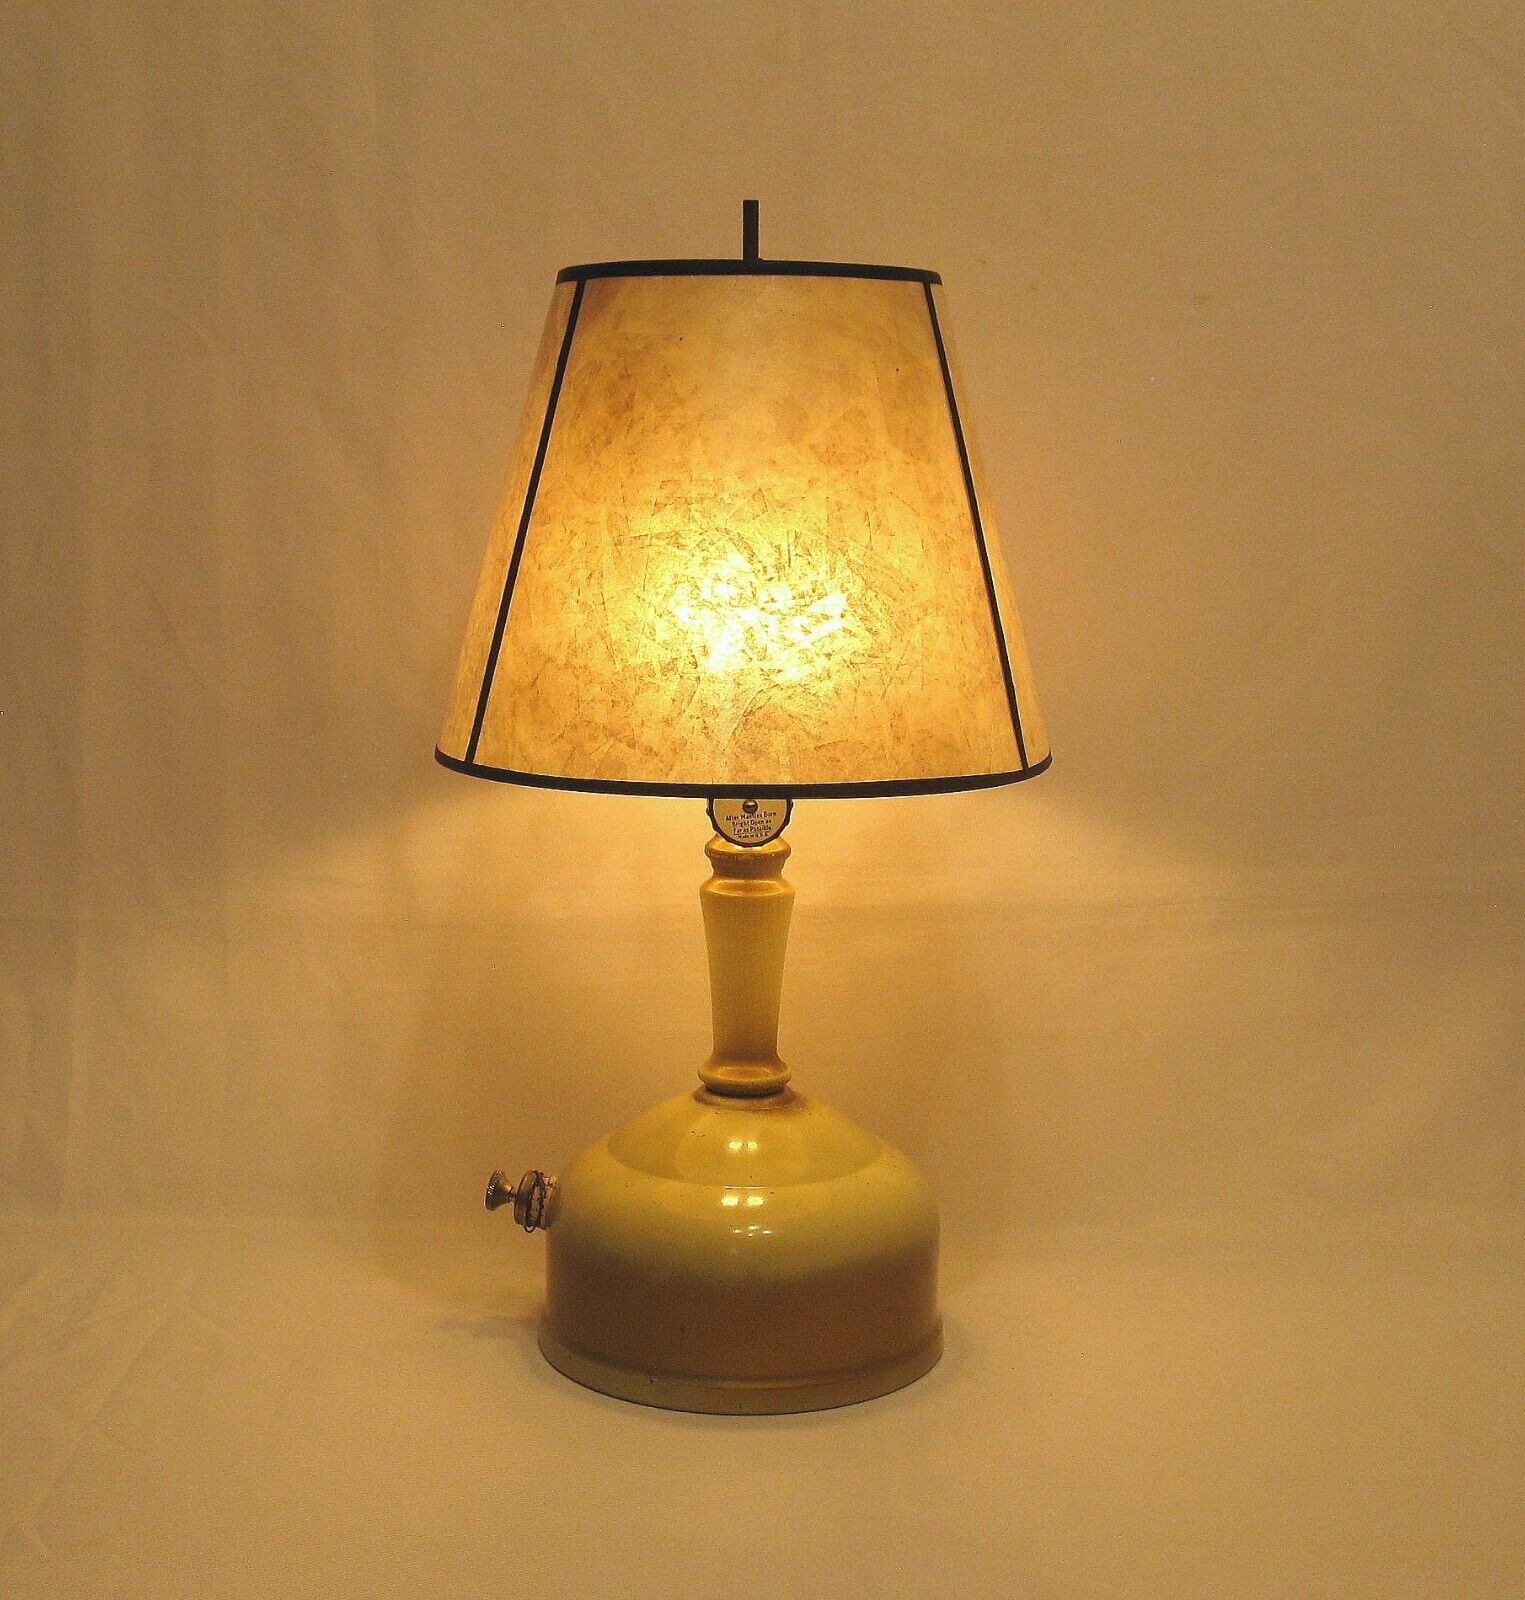 Vintage Coleman U.S. Model 152A Table Lamp Dated A-1948 Works Perfect EXC COND